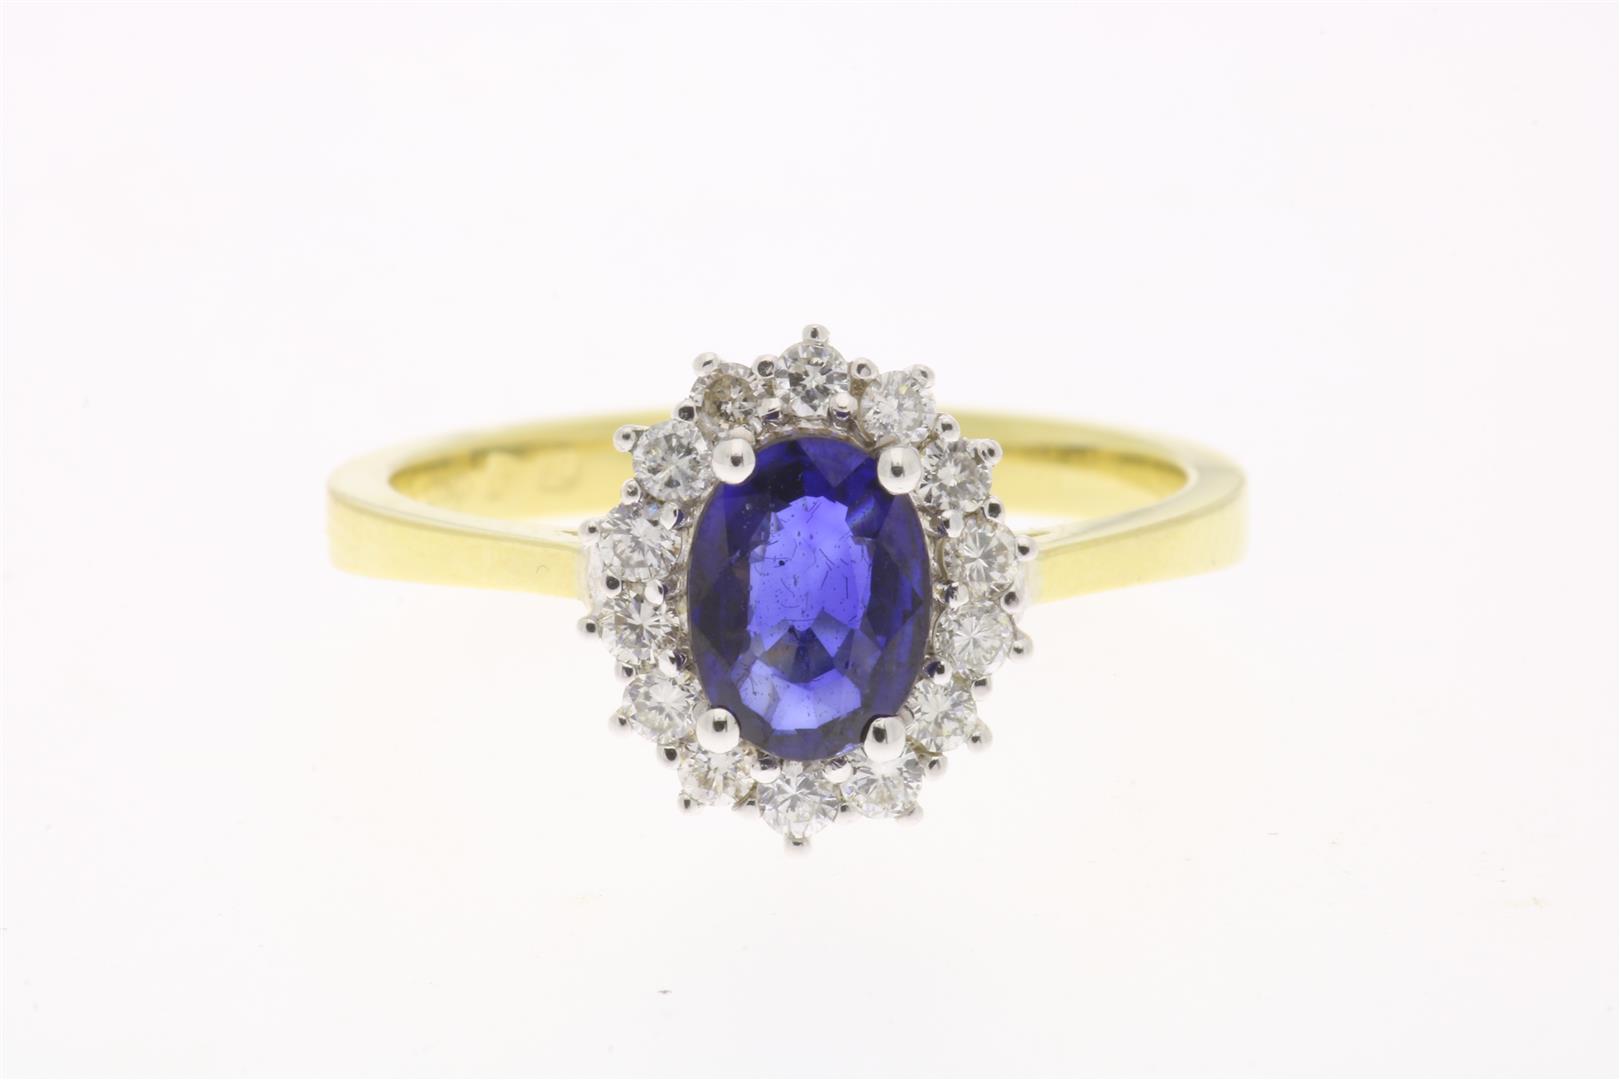 Bicolor gold entourage ring centrally set with a sapphire, approximately 0.70 ct. in an entourage of